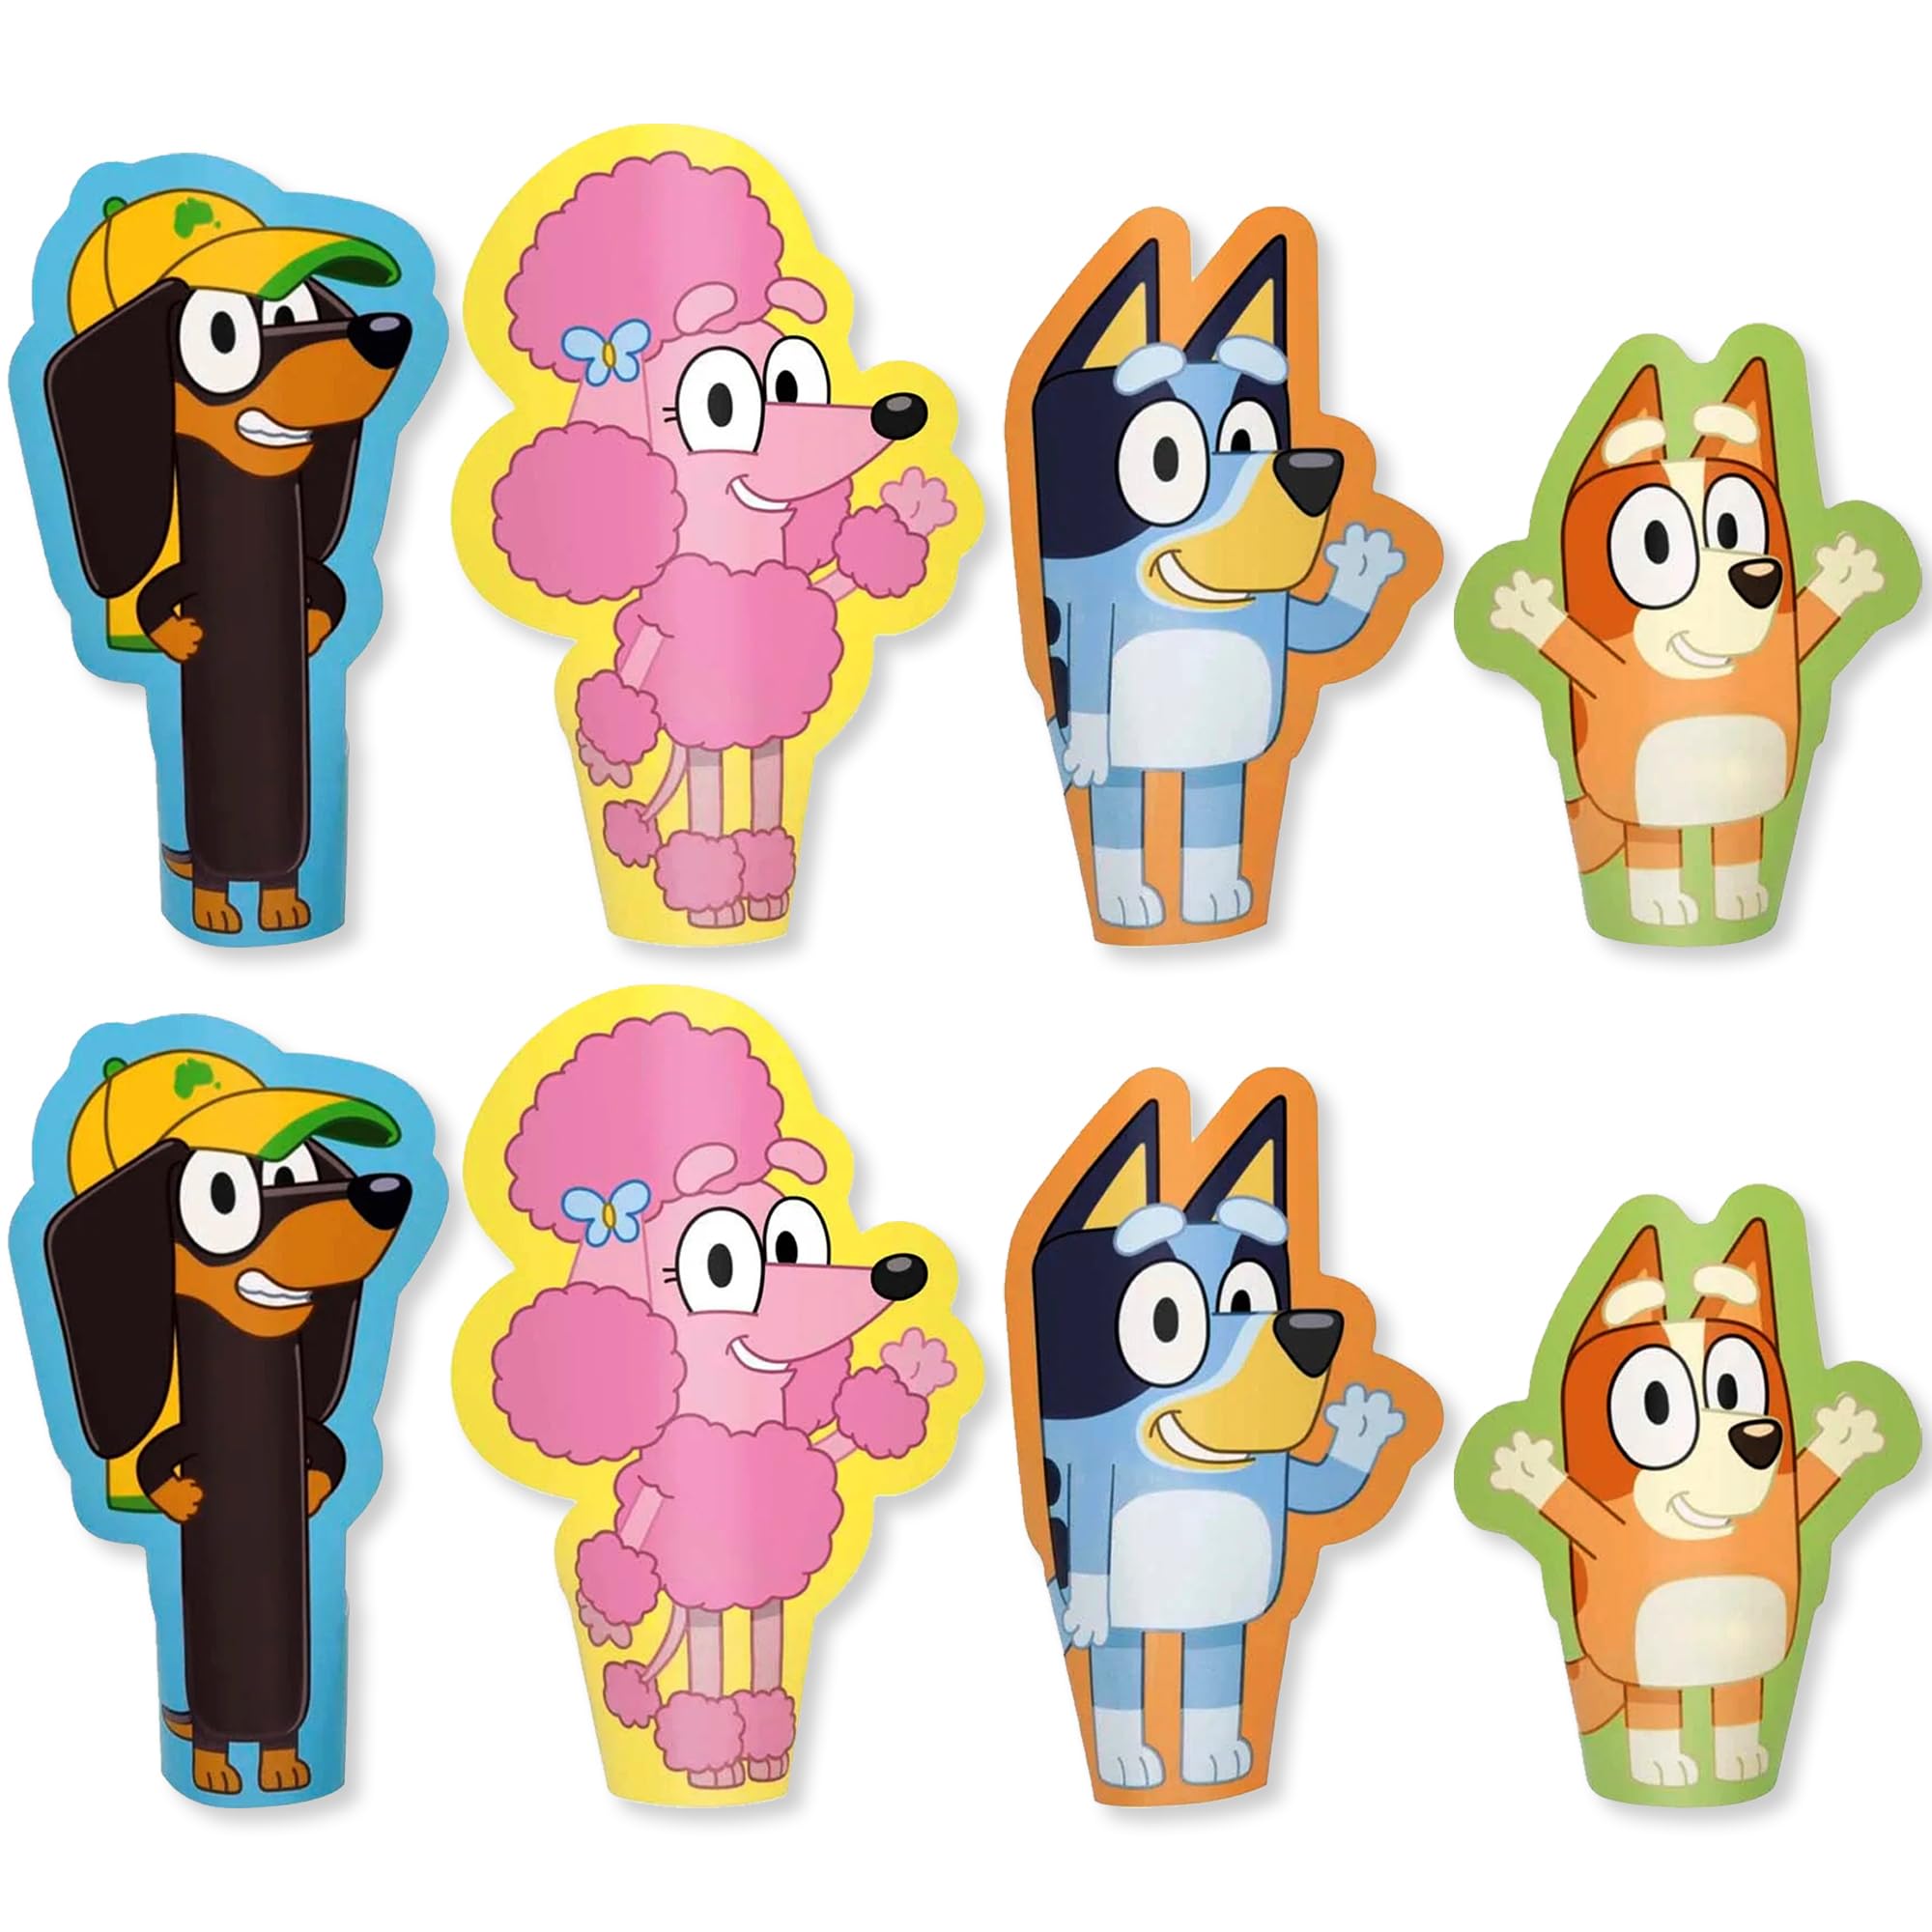 Bluey Die-Cut Paper Finger Puppets - (8 Pack) | Multi-Colored Puppets for Creative Play & Interactive Games